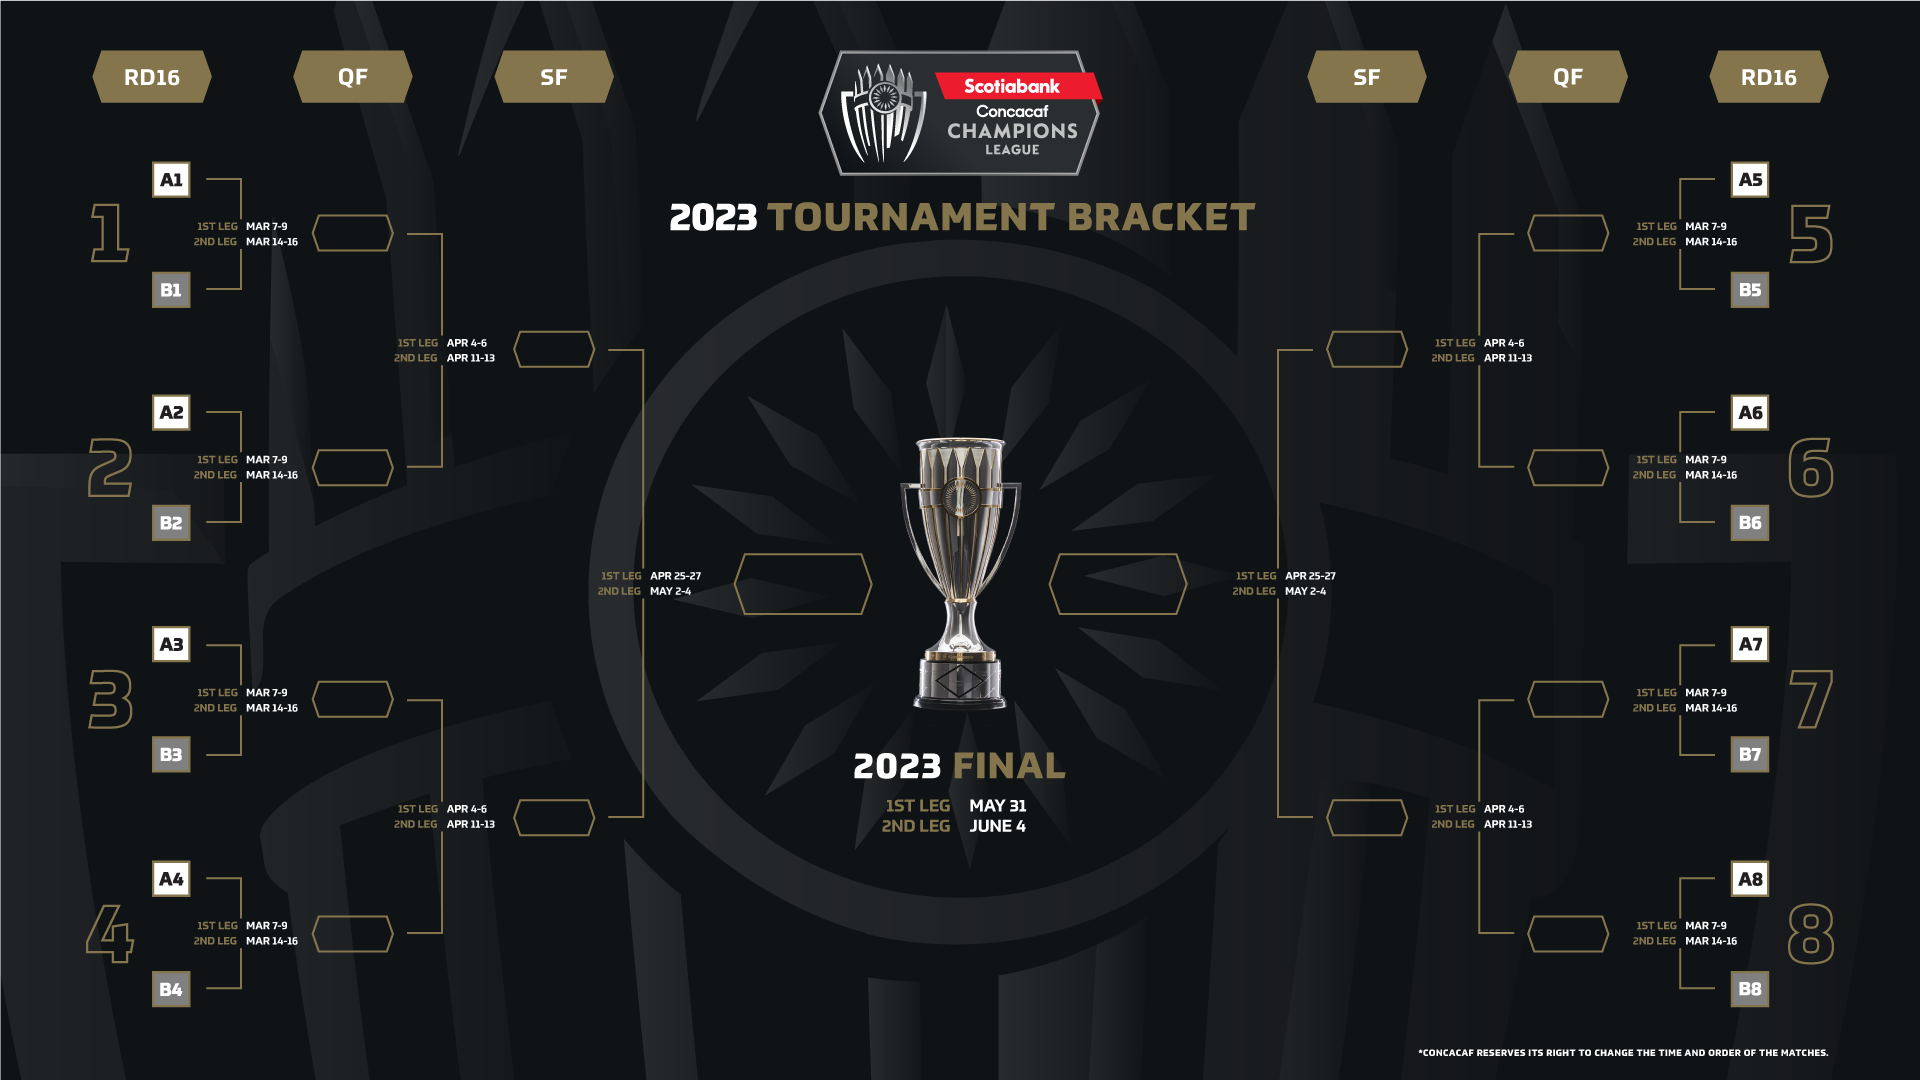 Schedule announced for 2023 Scotiabank Concacaf Champions League Round